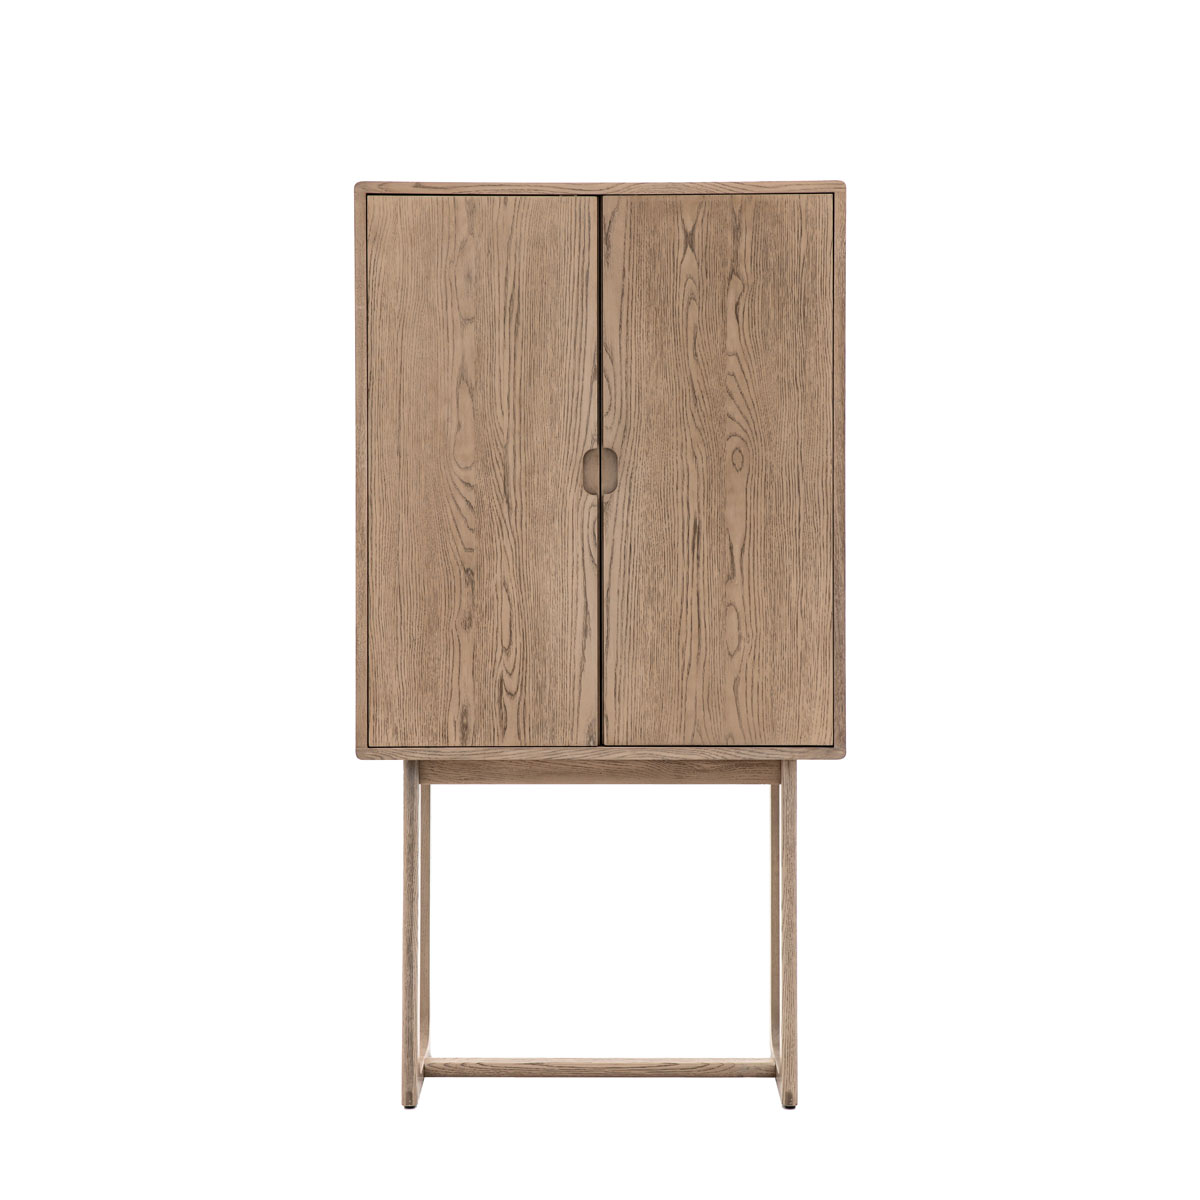 Craft Cocktail Cabinet Smoked 850x450x1600mm